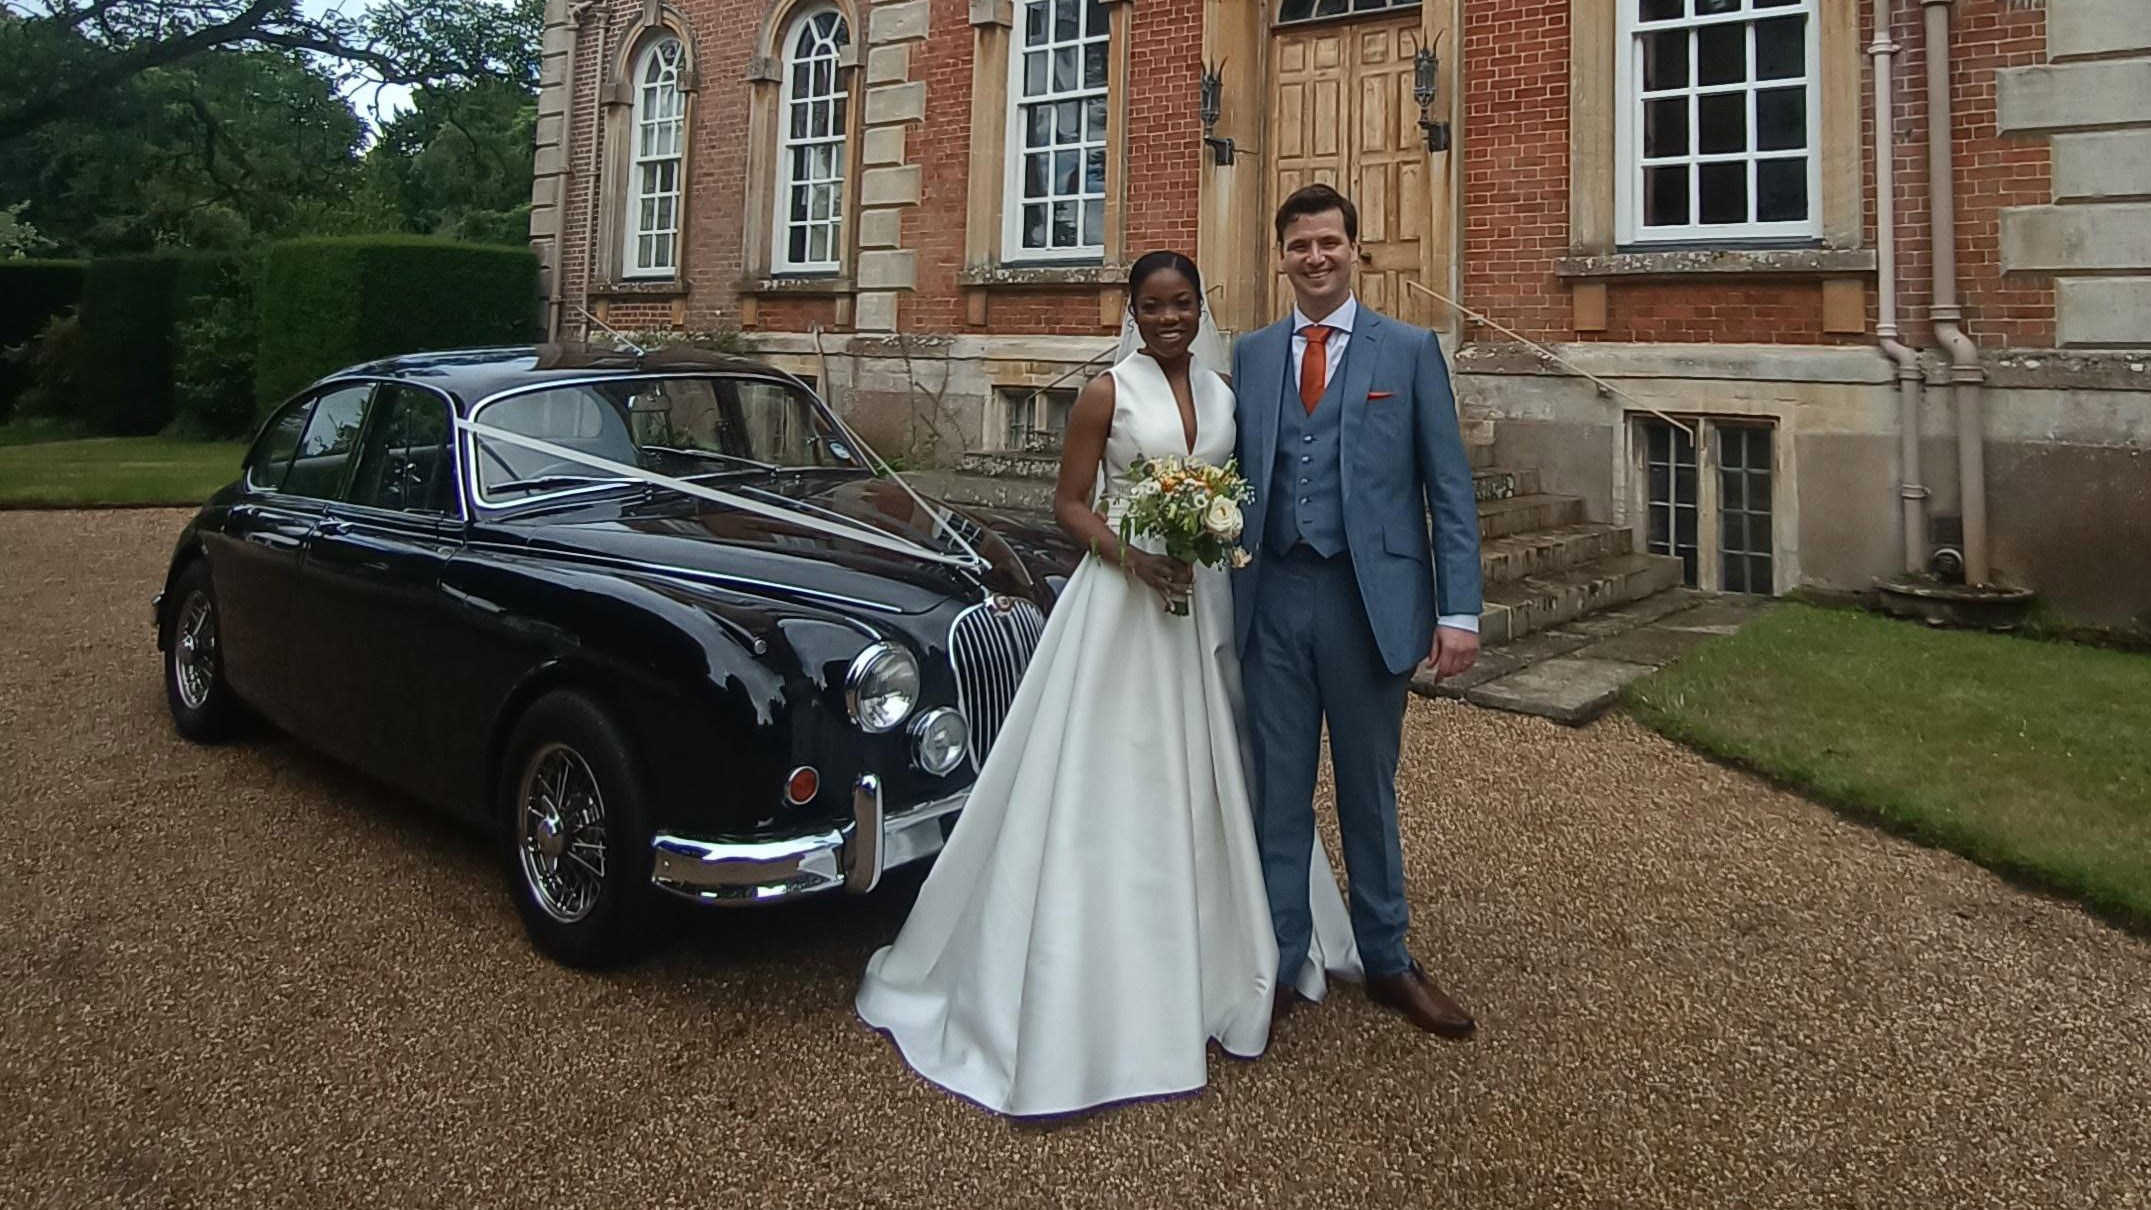 Black Classic Jaguar Mk2 decorated with Ribbons with Bride and Groom standing in front of the vehicle smiling